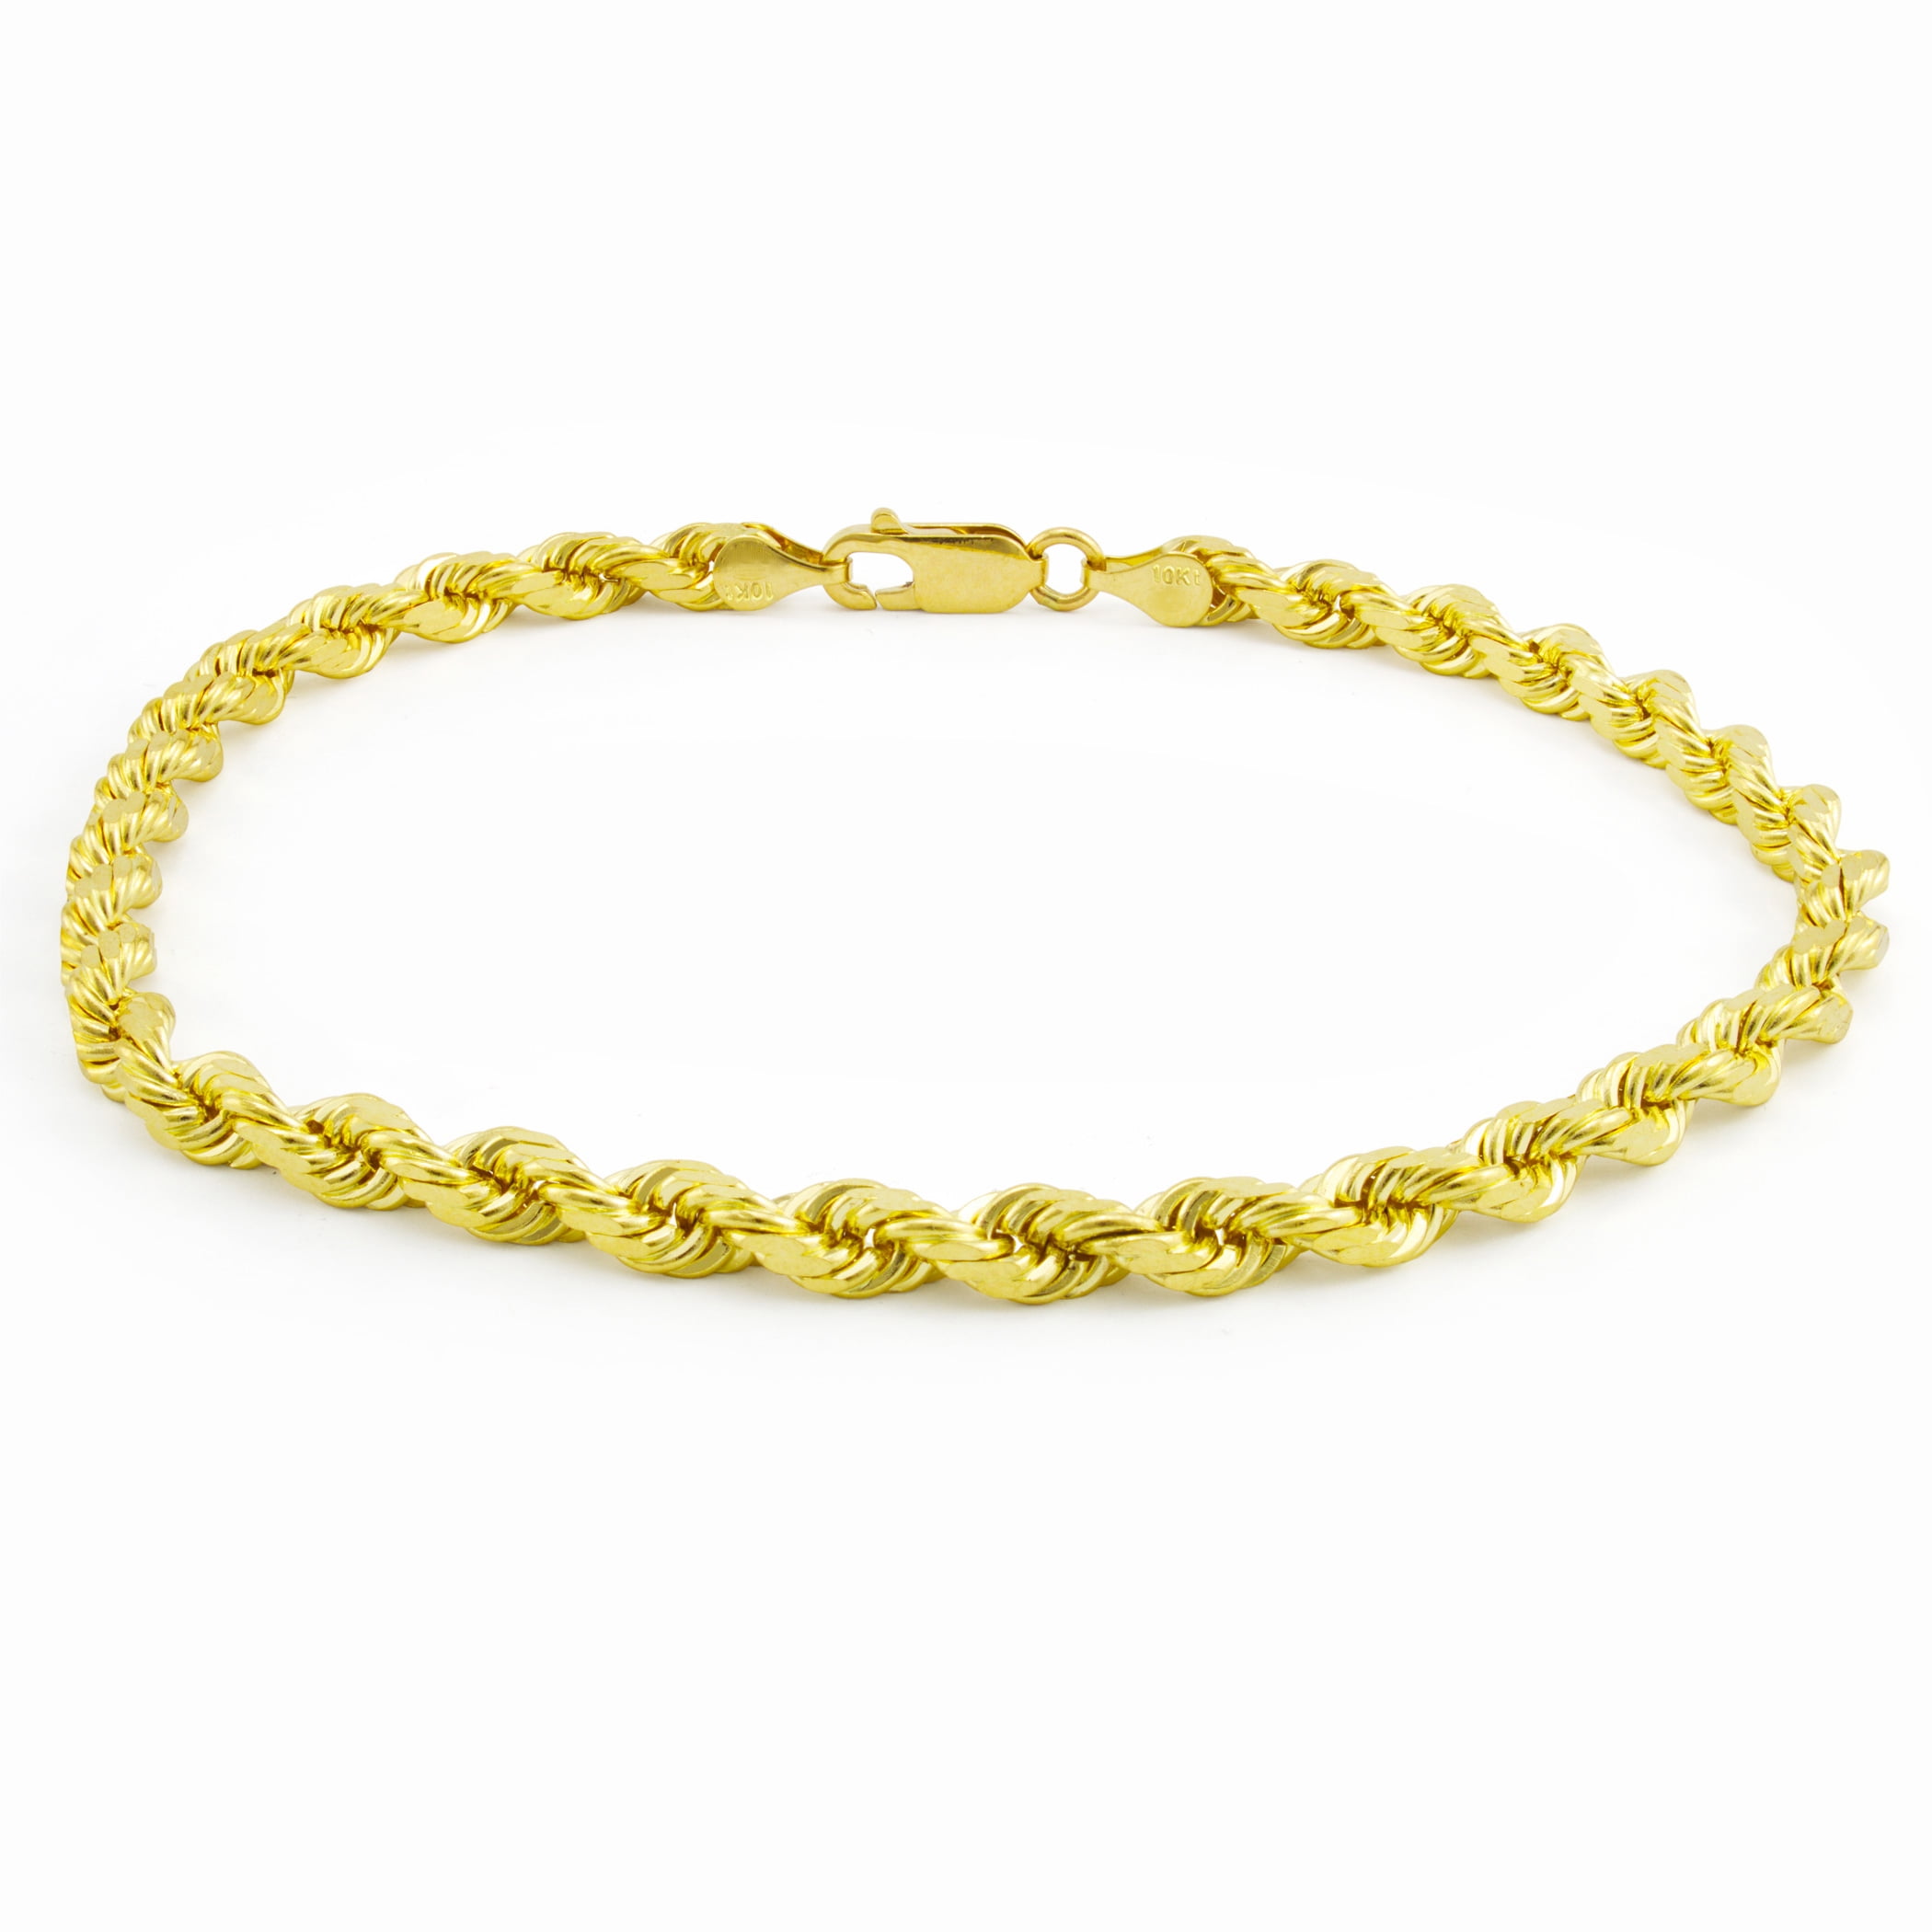 Nuragold 14k Yellow Gold Solid 7.5mm Anchor Mariner Link Chain Bracelet,  Mens Jewelry Lobster Clasp 7